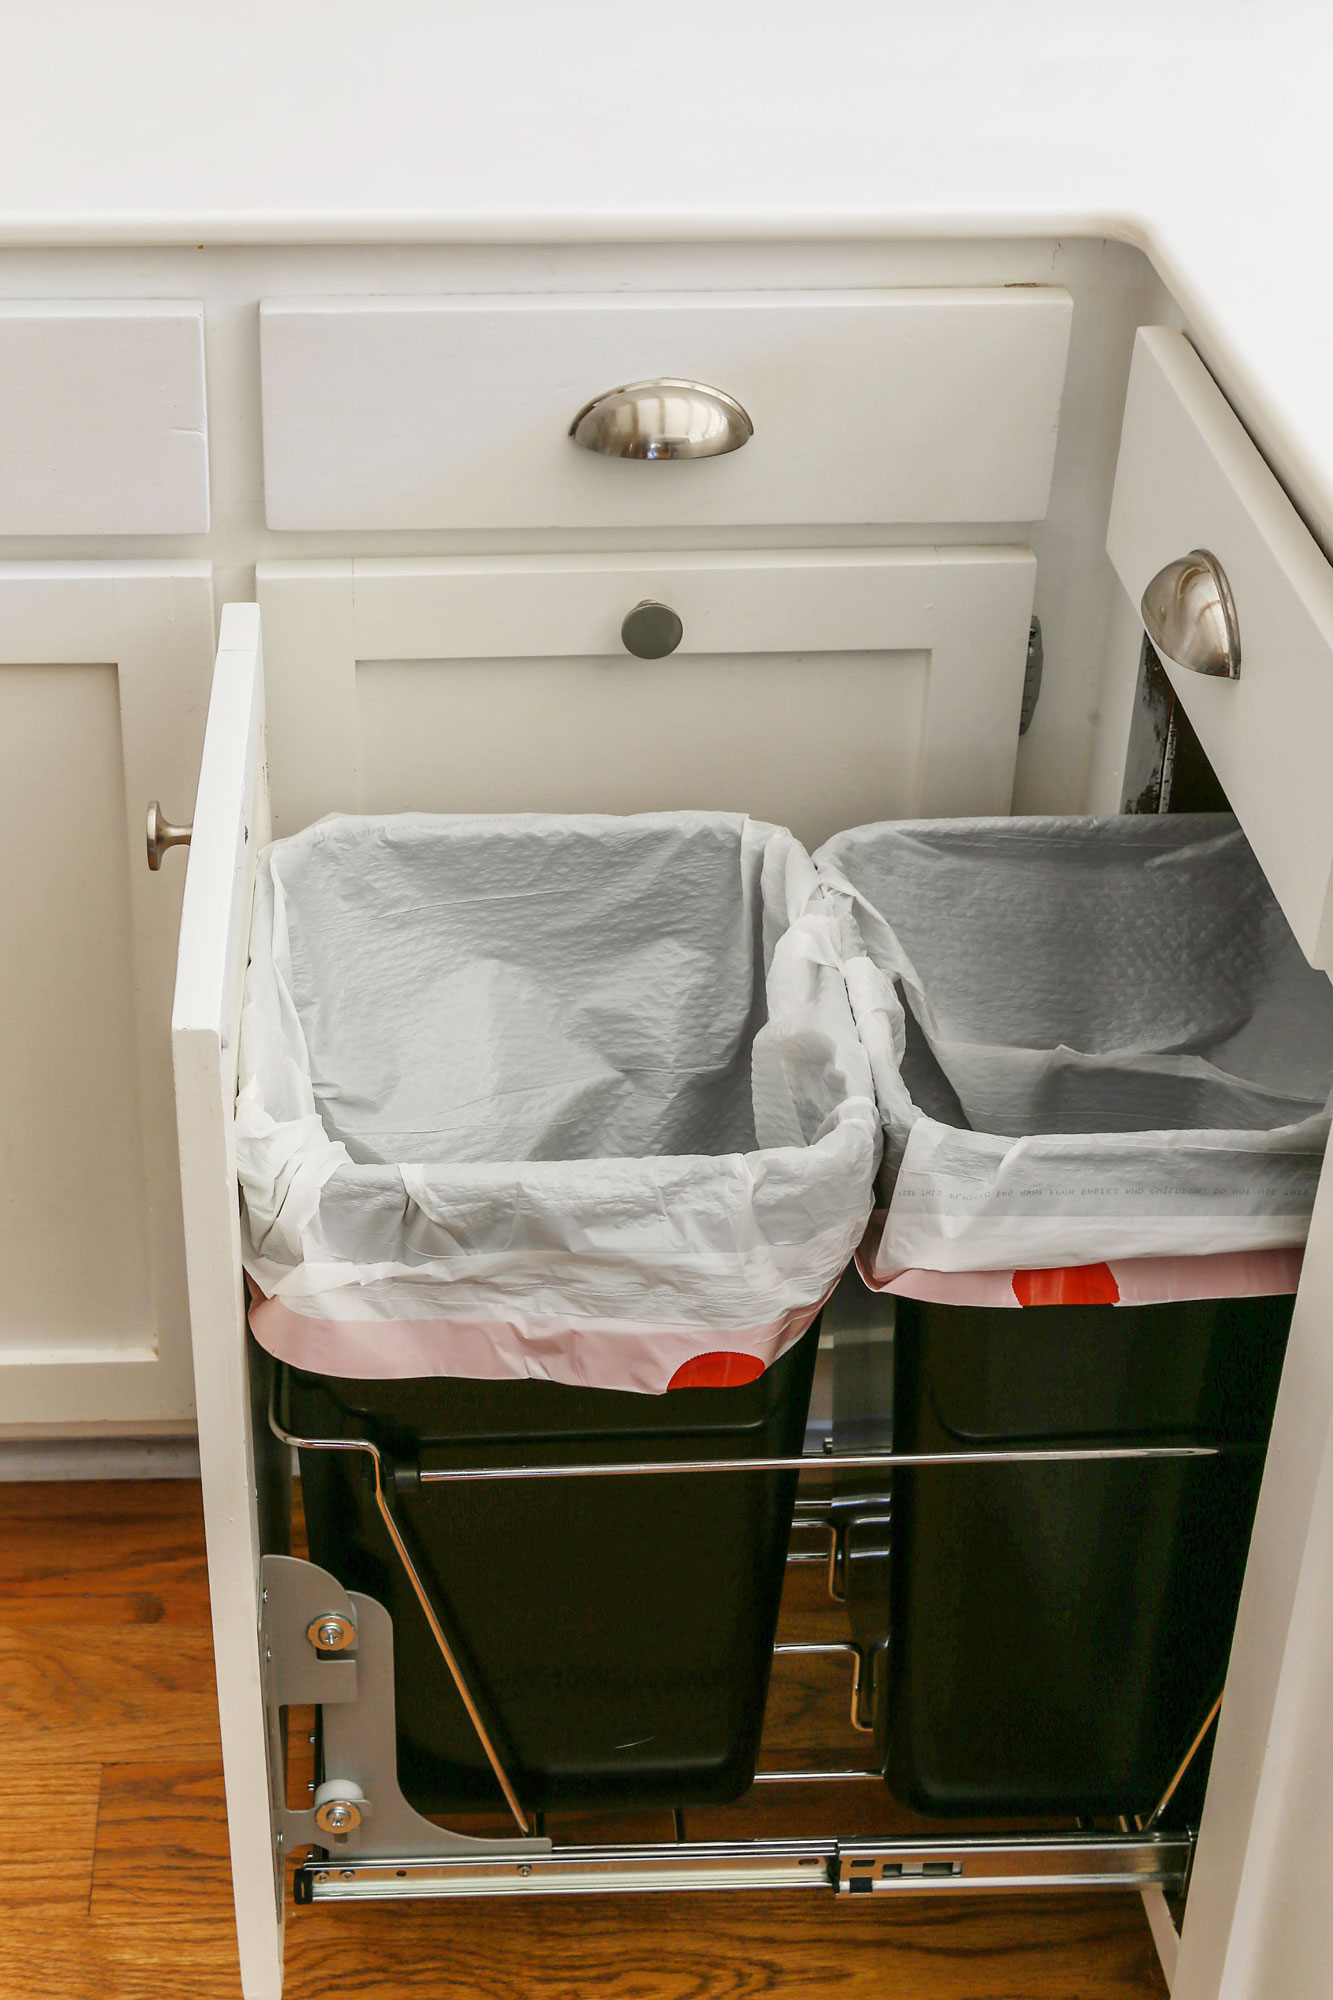 Kitchen Design Idea - Hide Pull Out Trash Bins In Your Cabinetry  Modern  kitchen trash cans, Ikea kitchen design, Interior design kitchen